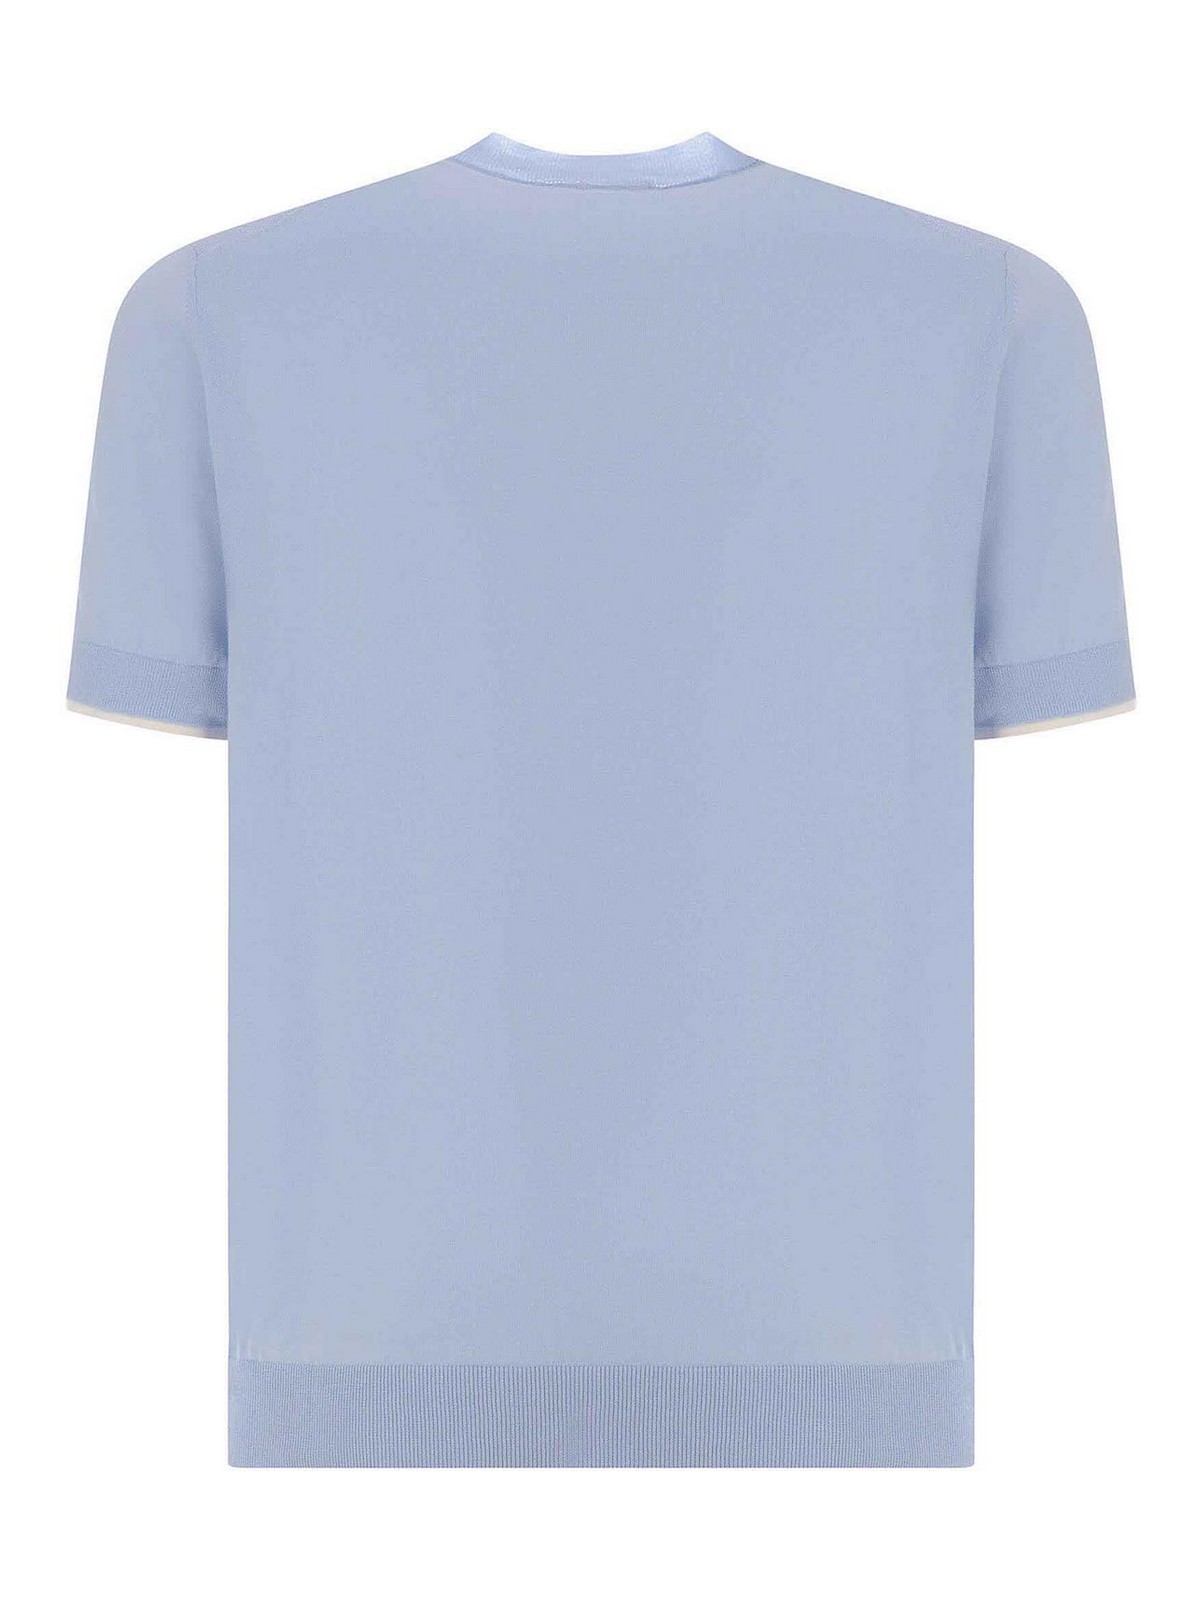 Shop Paolo Pecora Sweater  Made Of Cotton In Light Blue